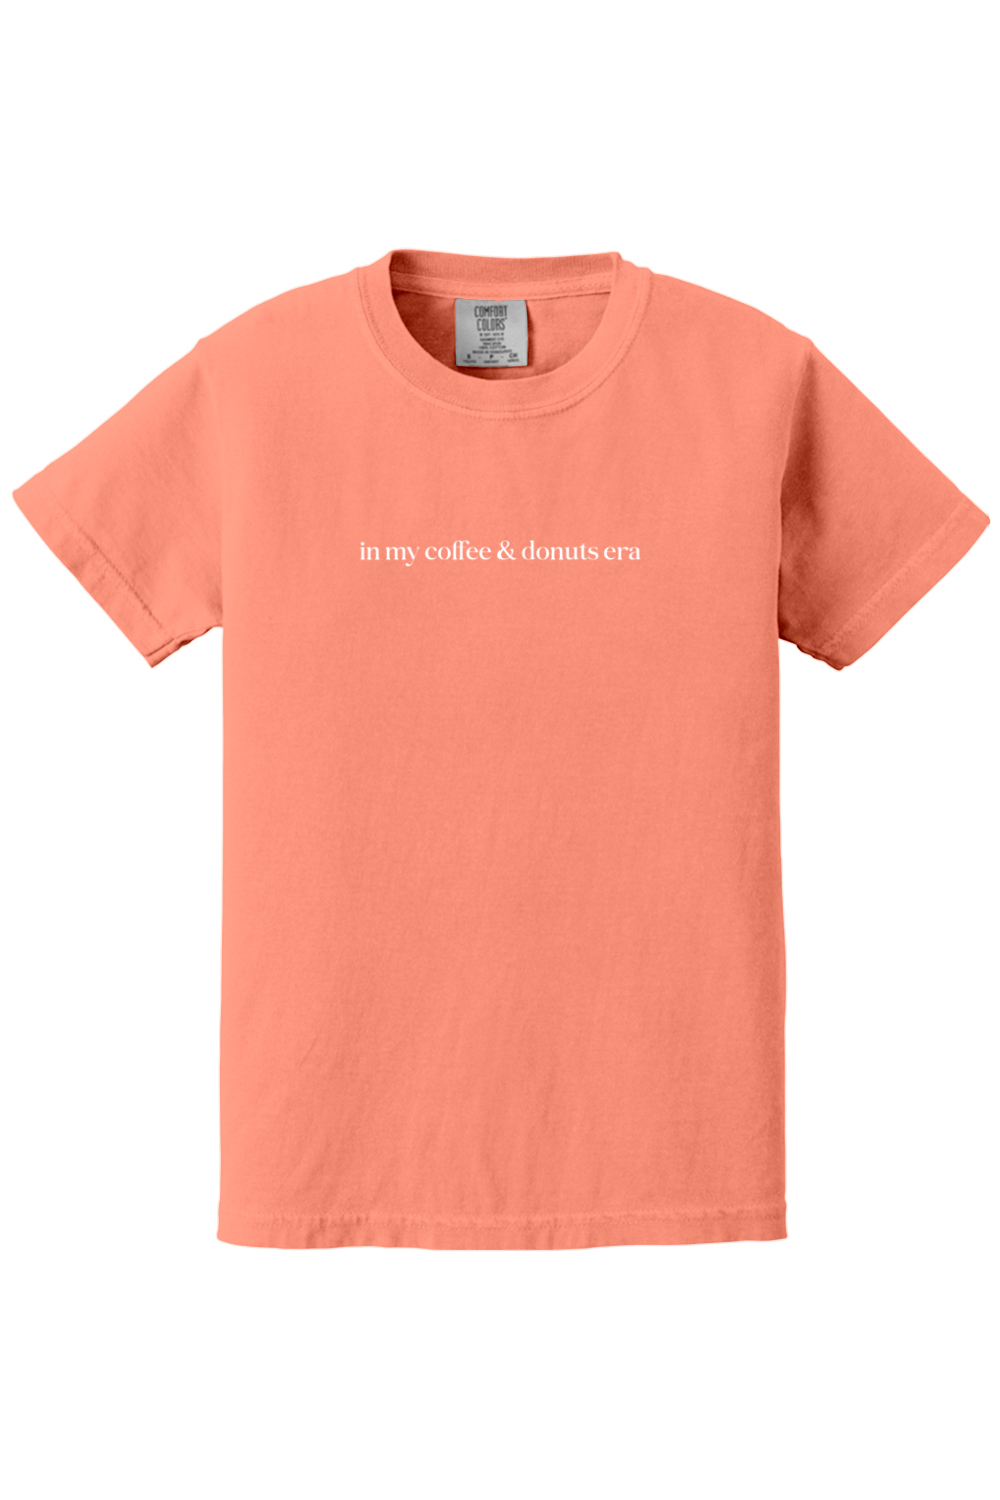 In My Coffee & Donuts Era Youth T-shirt - Comfort Colors